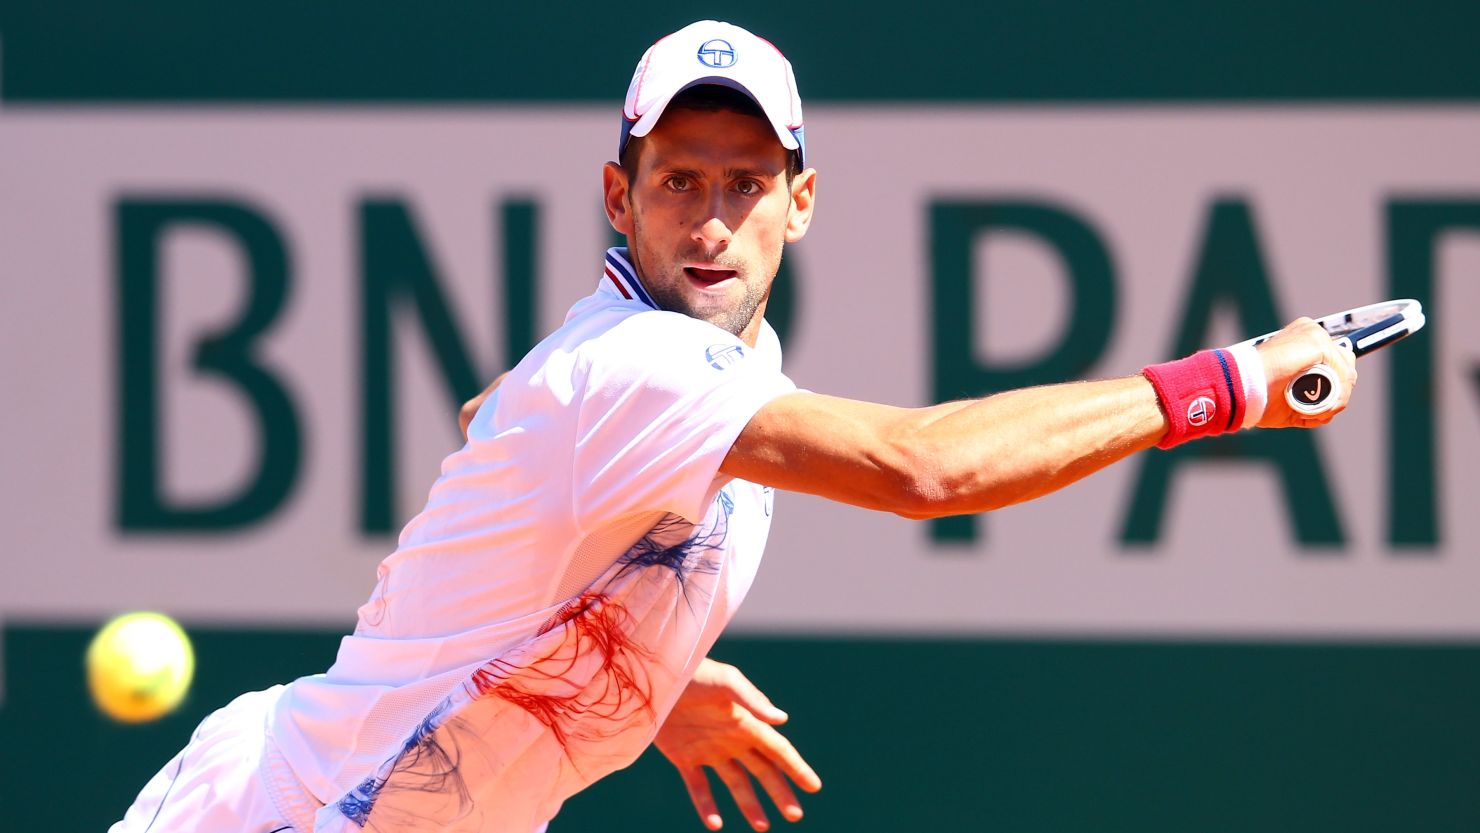 Novak Djokovic was in action in Monte Carlo the day after he learned of his grandfather's death